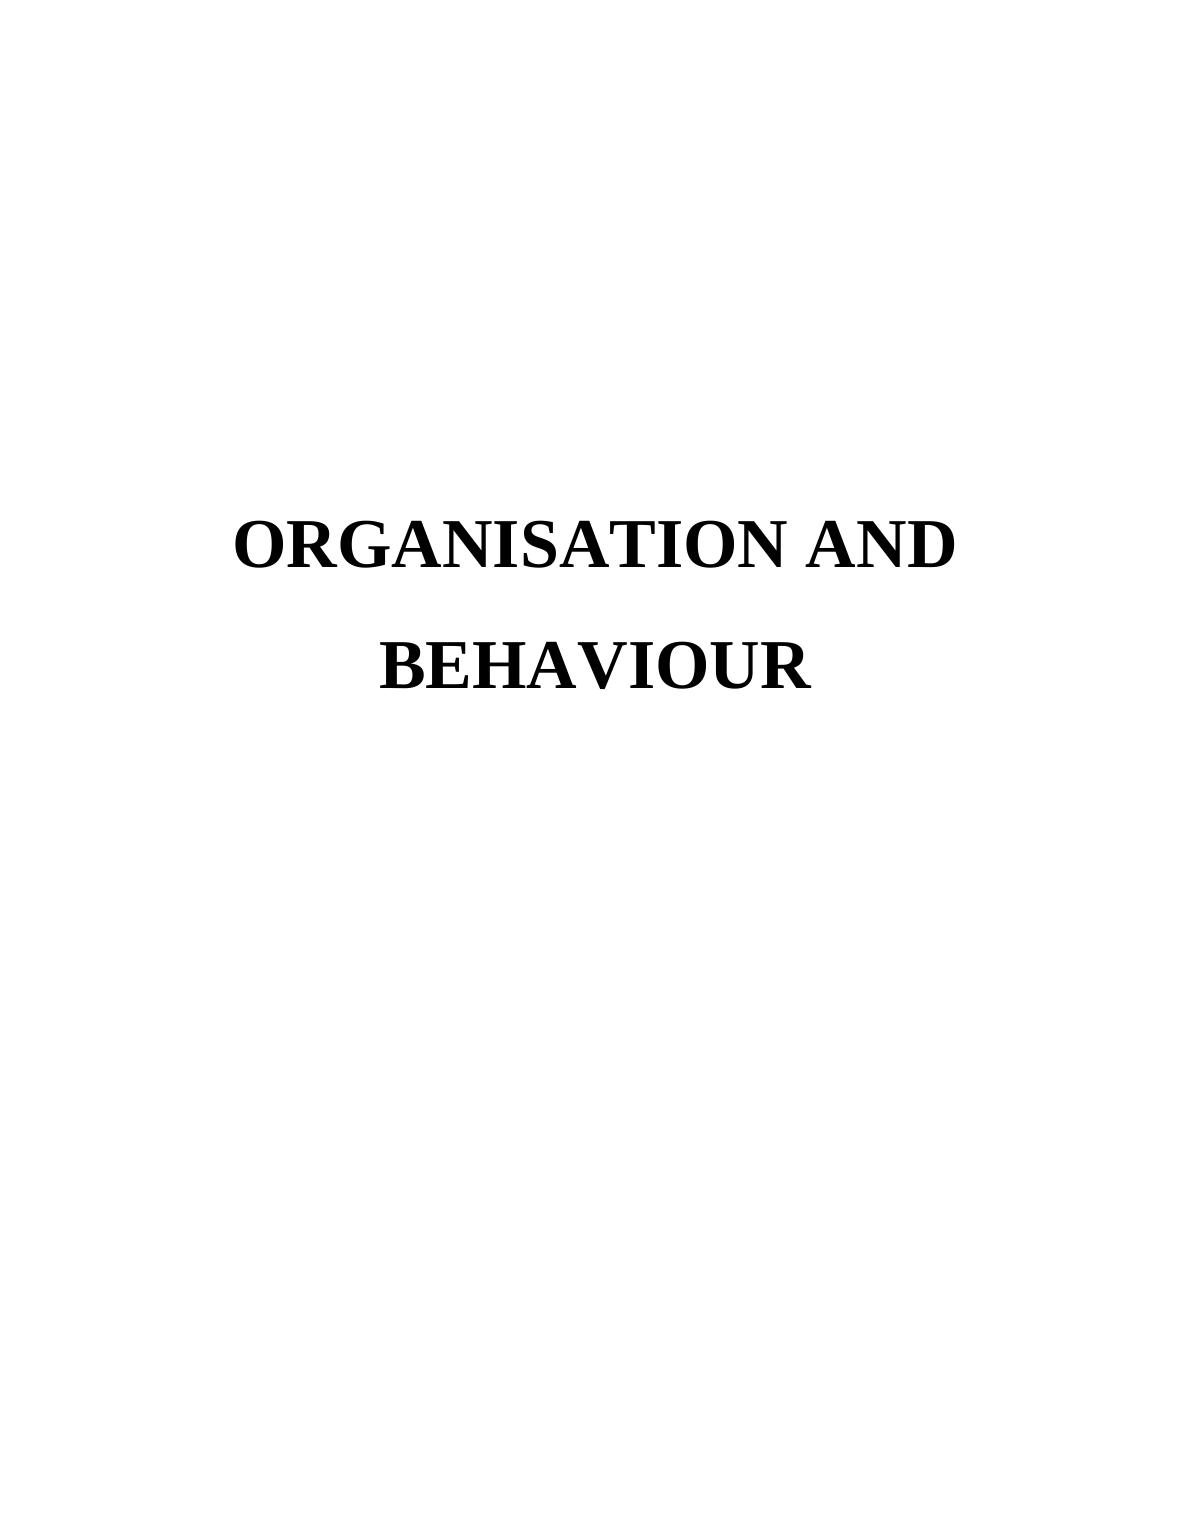 Report on Organisation and Behaviour_1